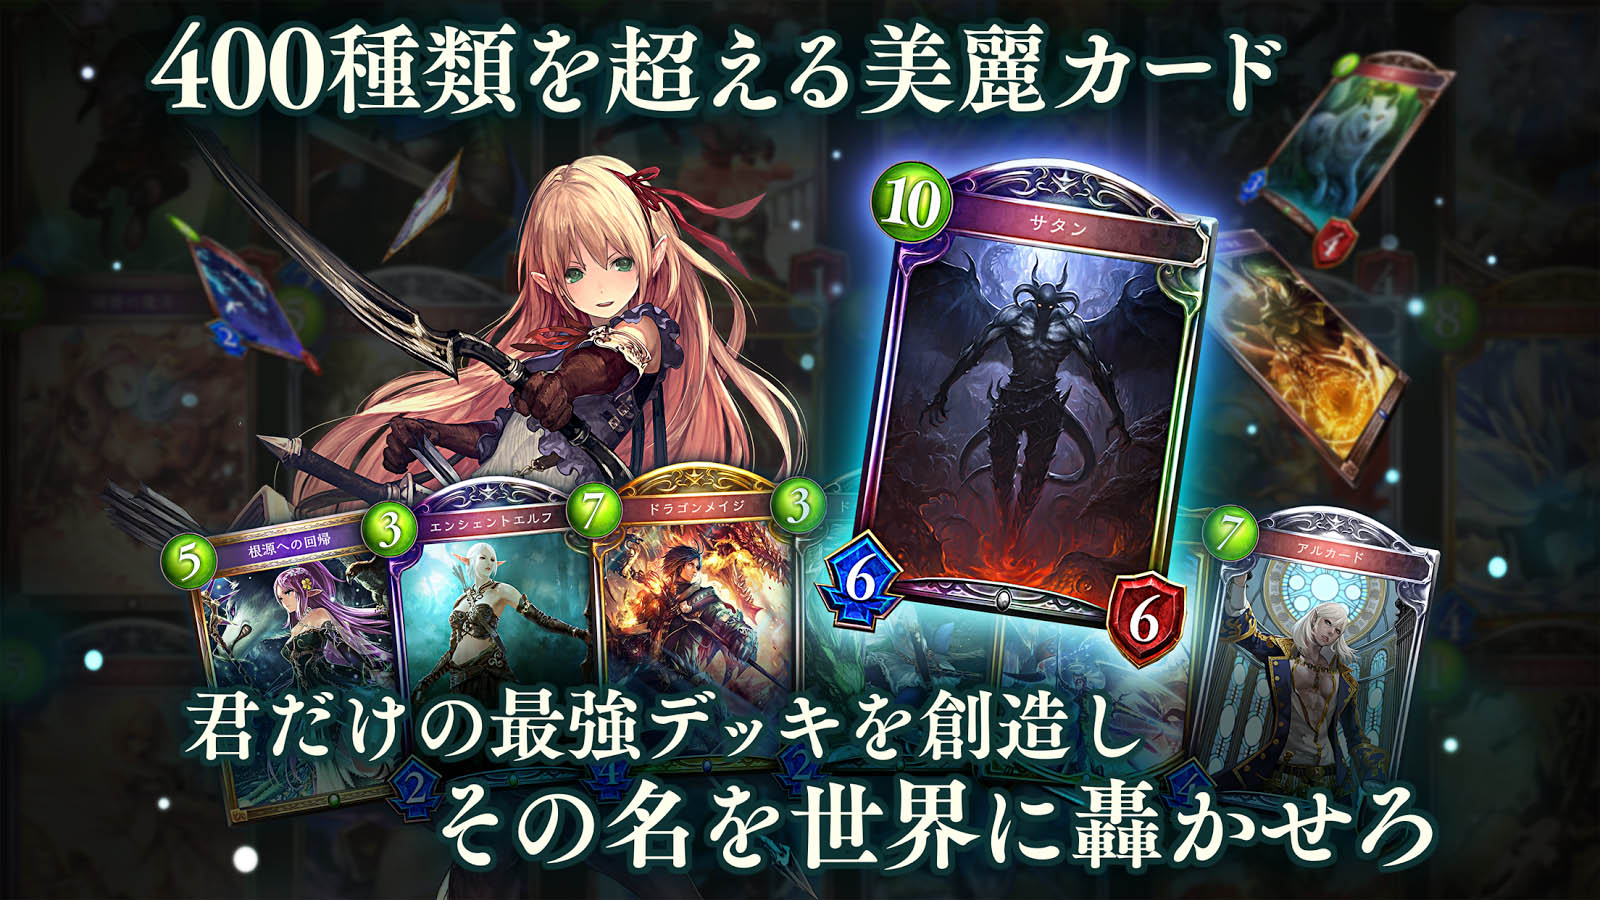 Shadowverse Android 4gamer